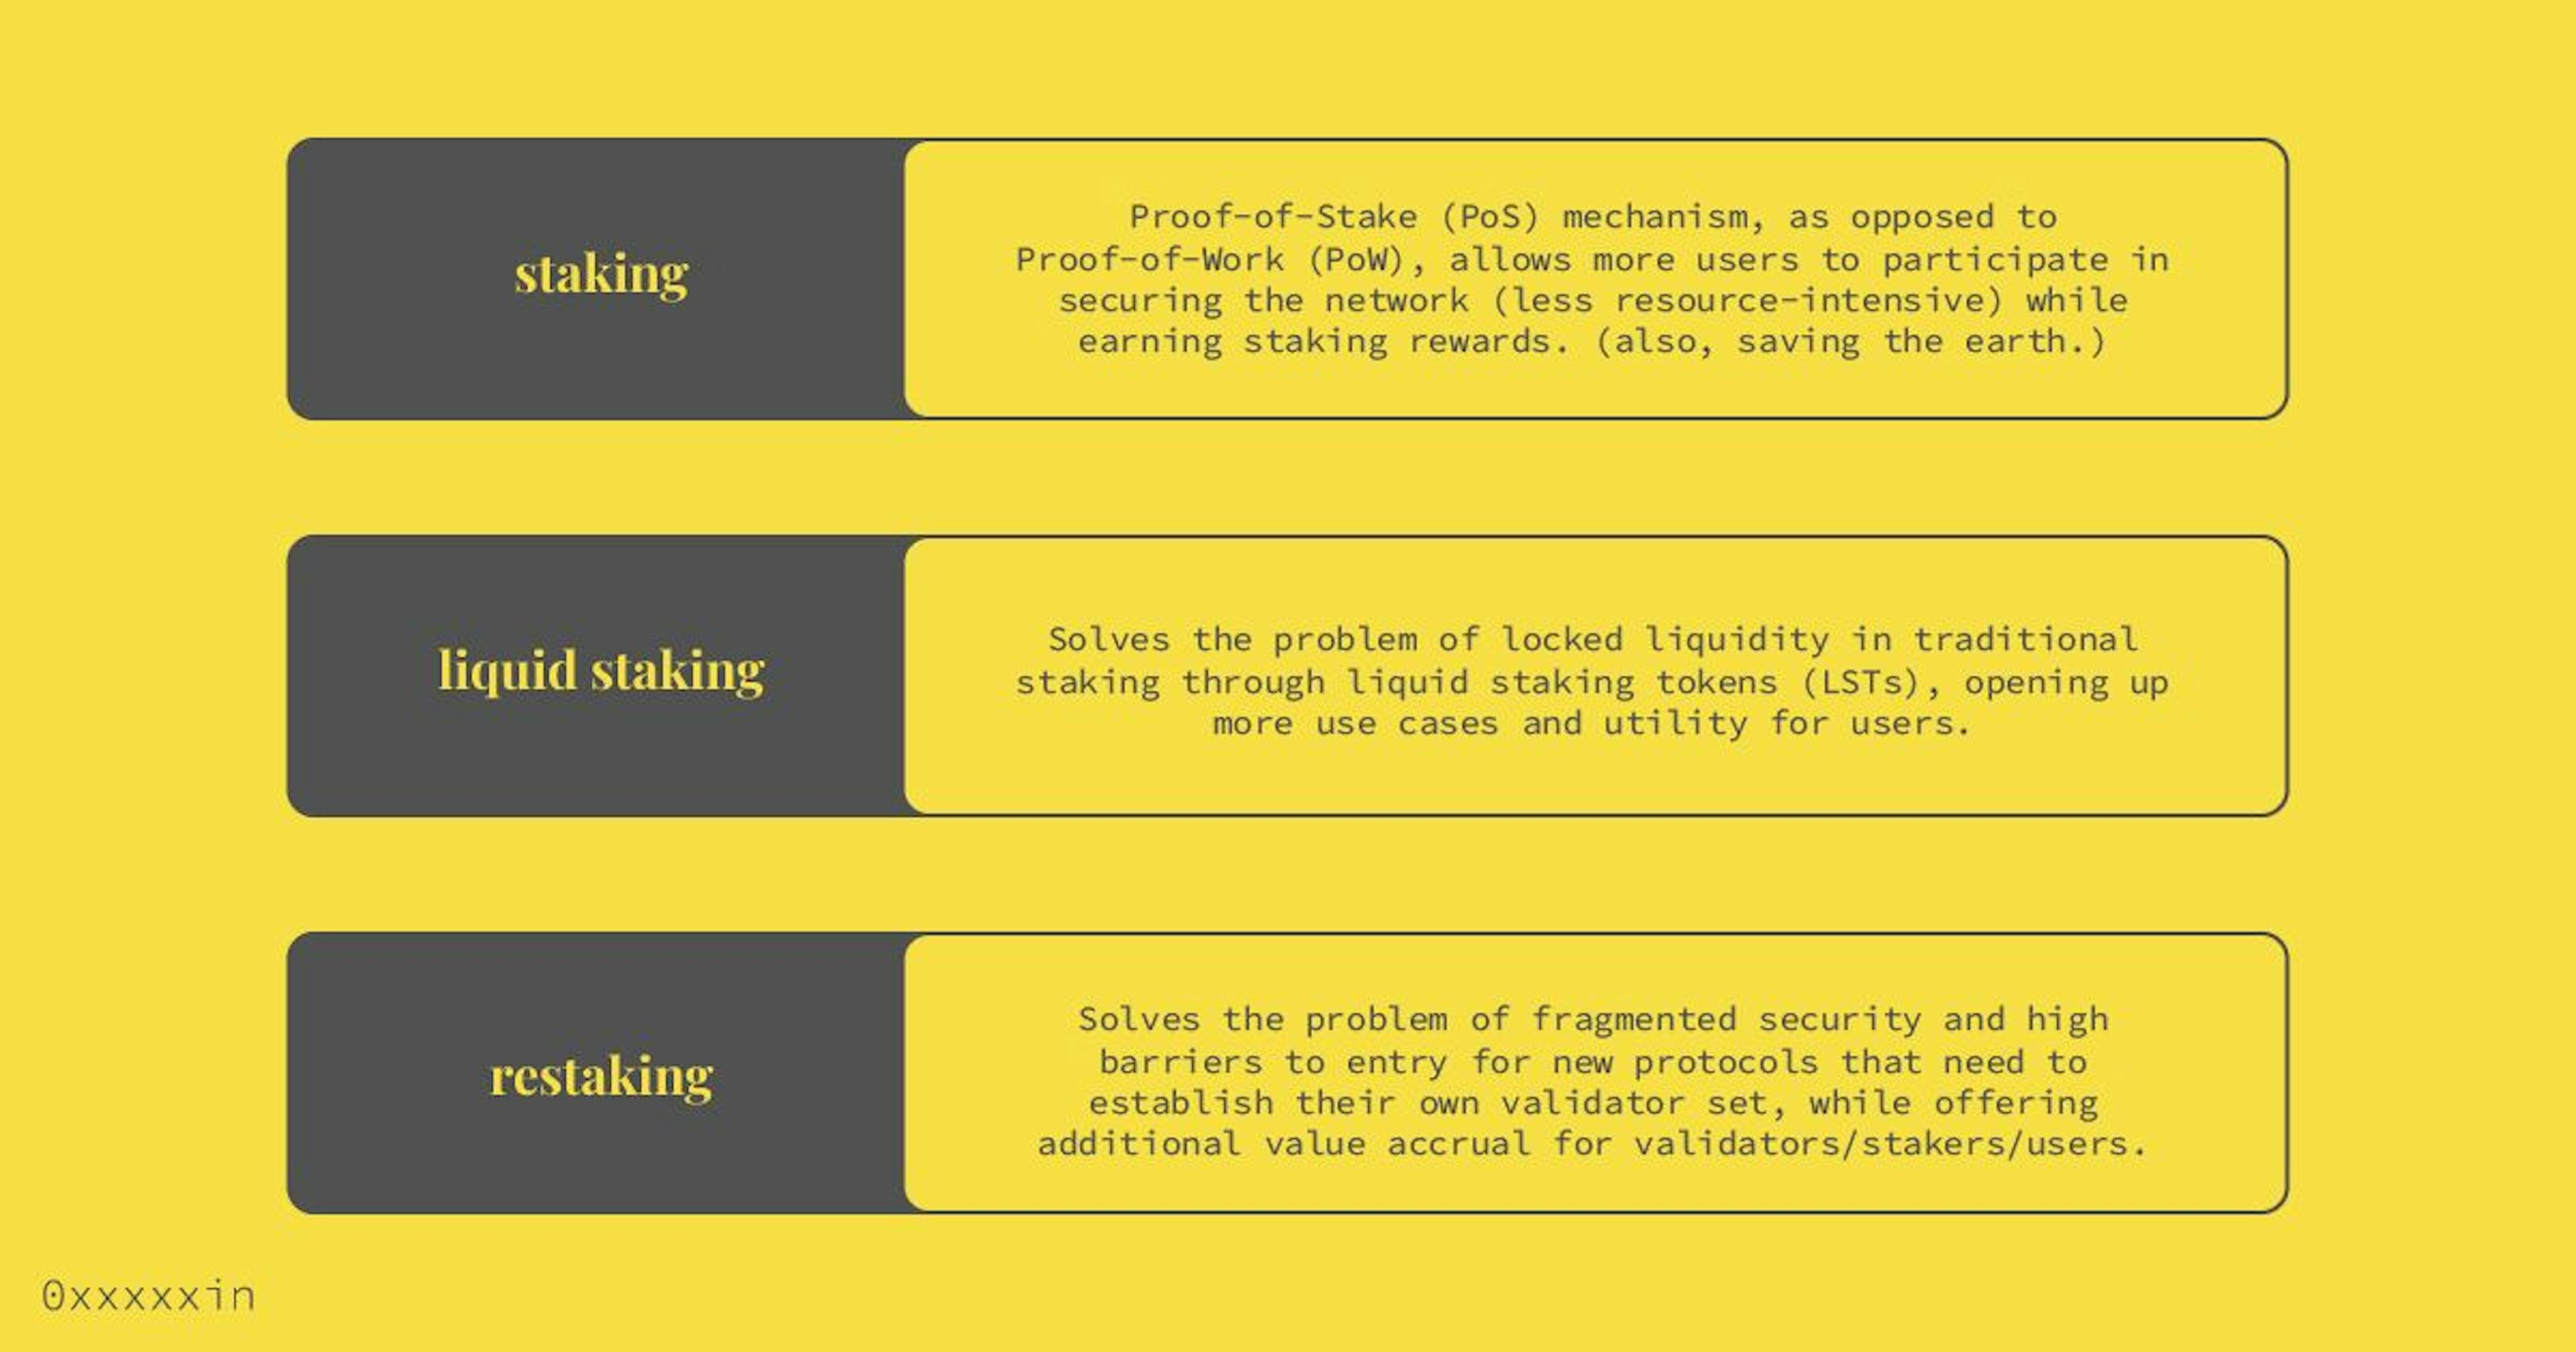 fig 1: staking, liquid staking, and restaking